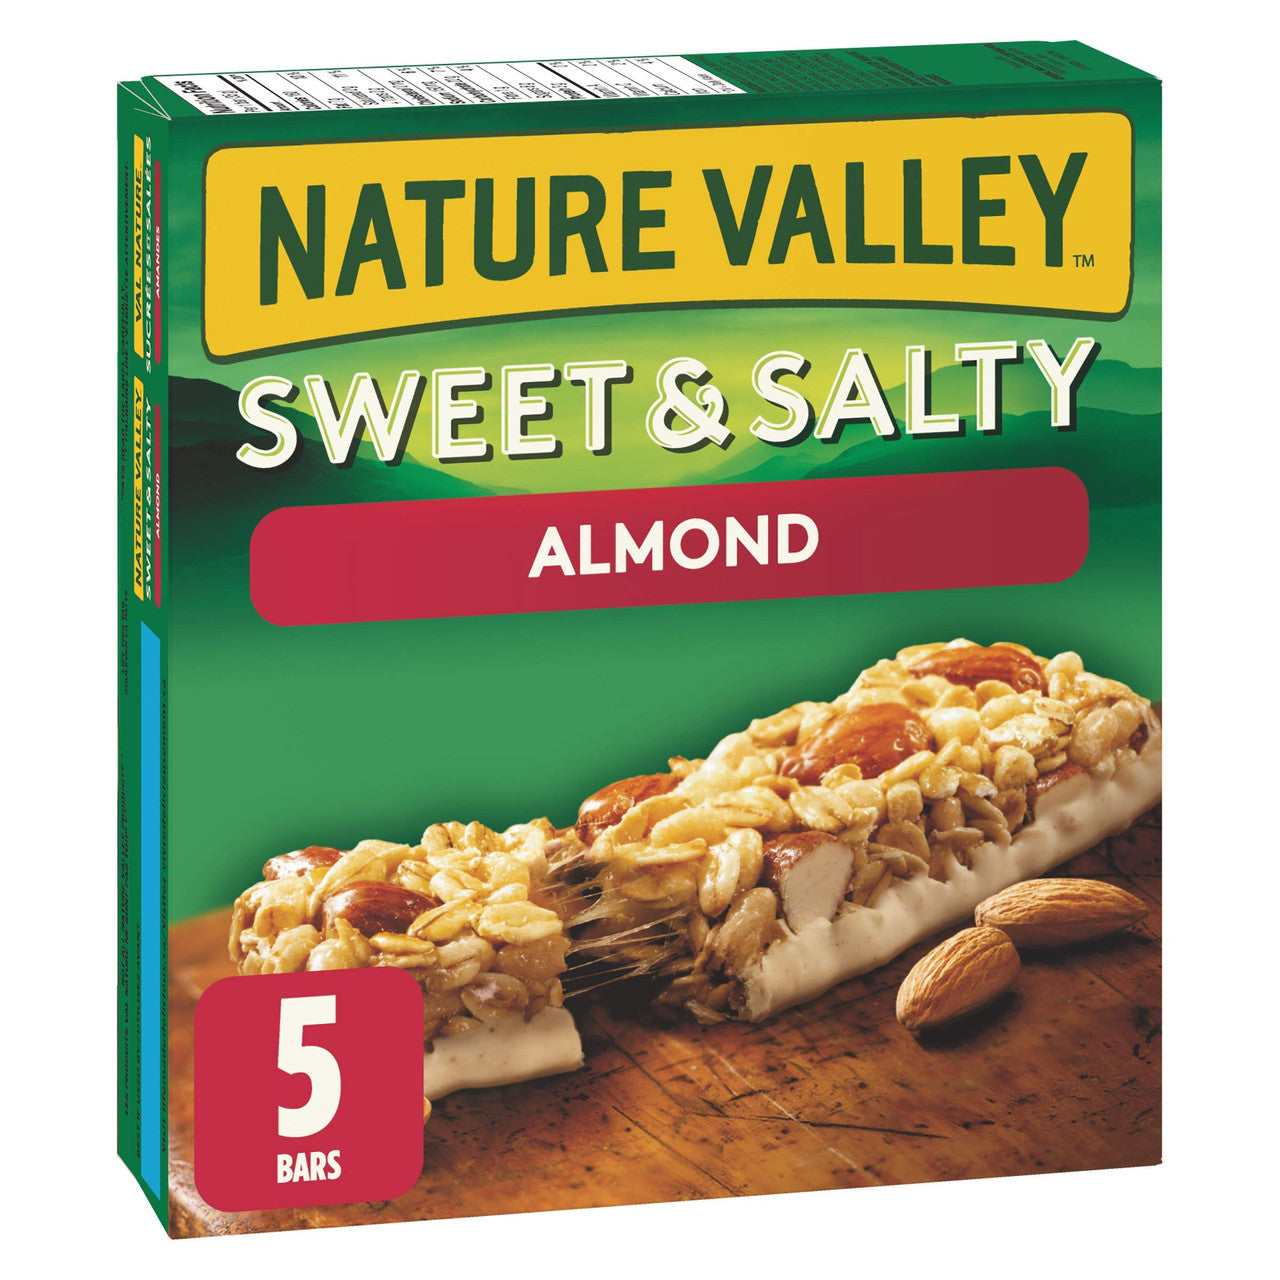 Nature Valley Sweet and Salty Almond, 5ct, 175g/6.17oz{Imported from Canada}